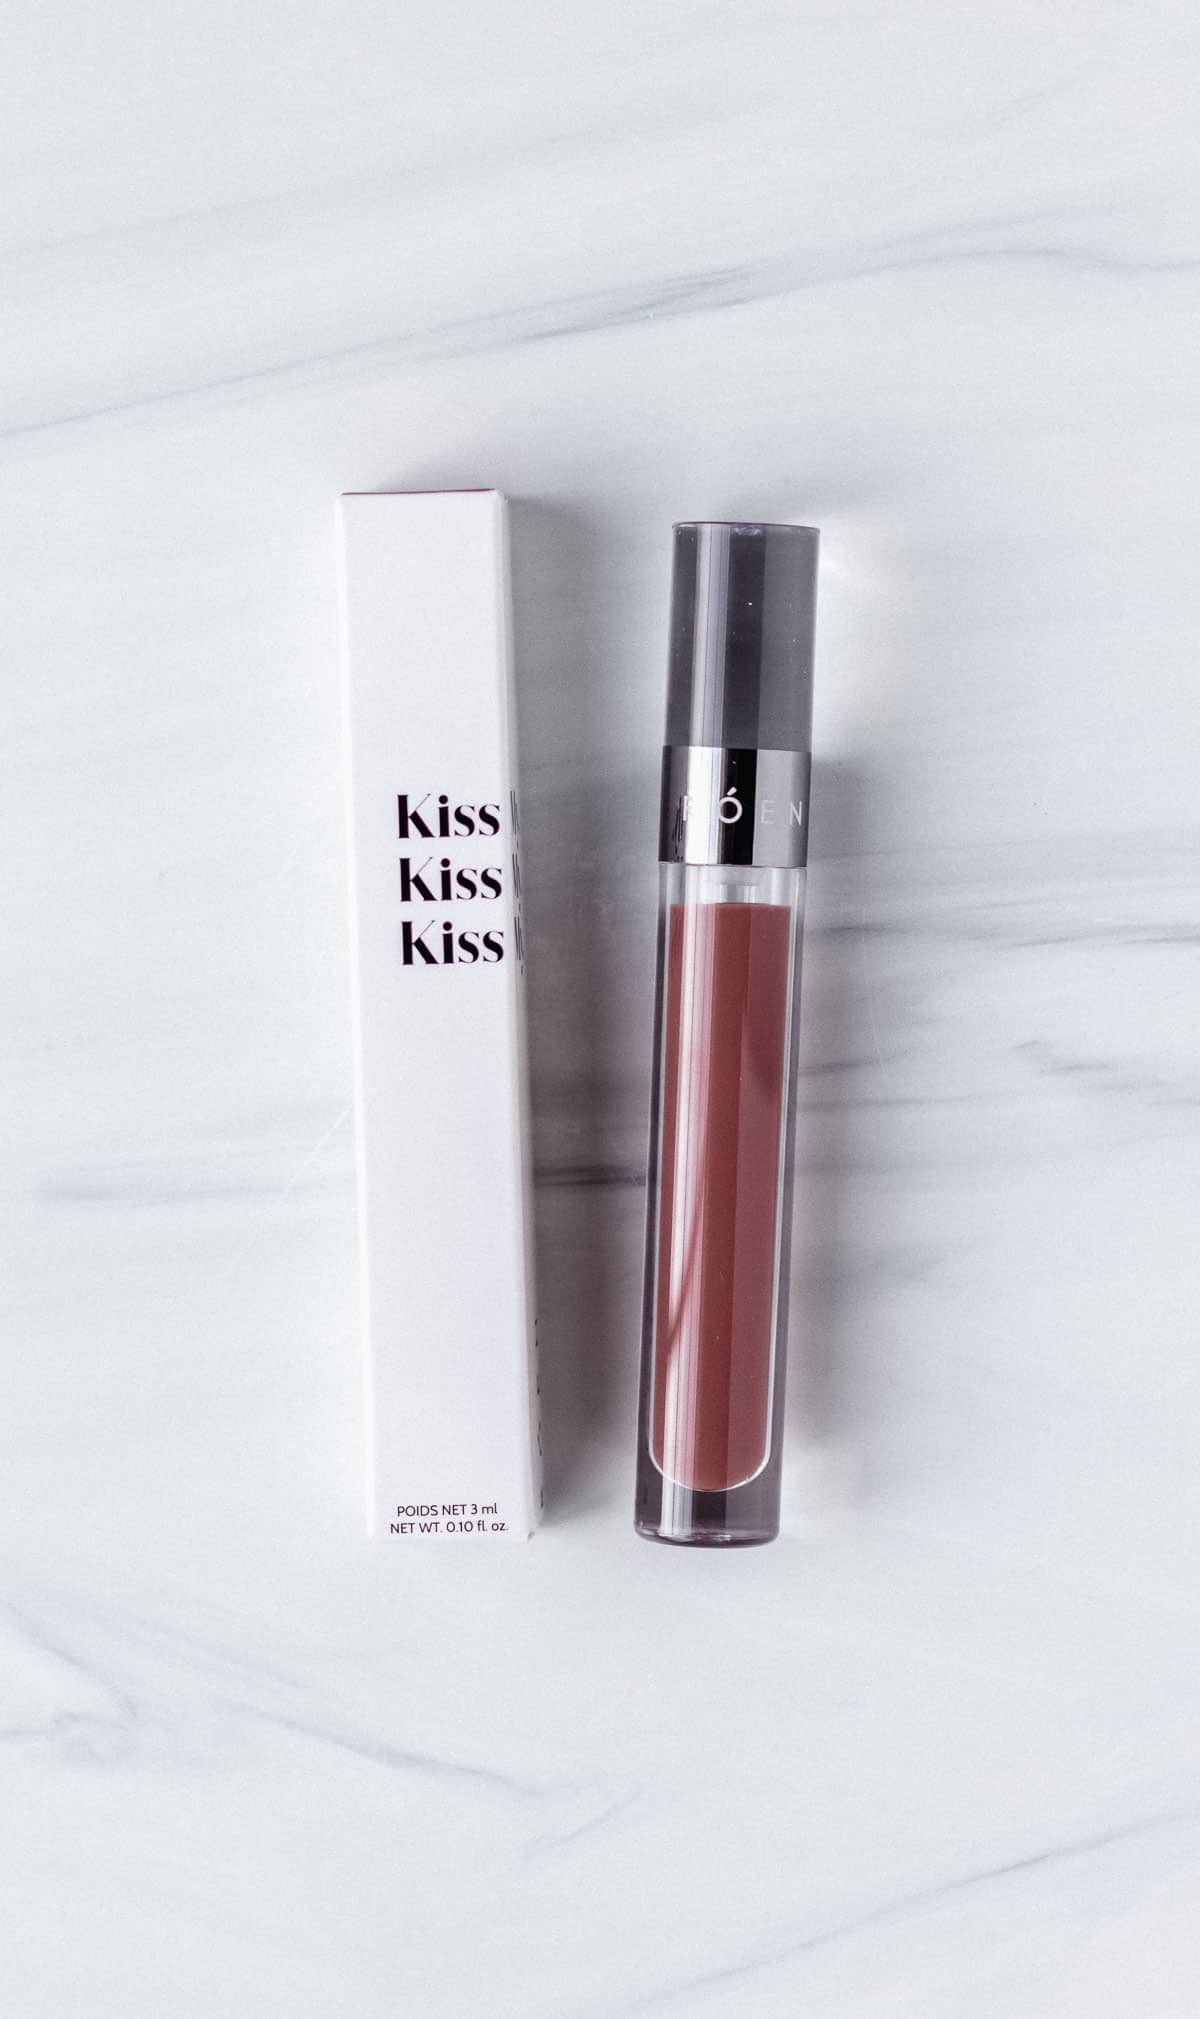 Roen Beauty Kiss My Liquid Lip Balm in Charlie with box on a white background